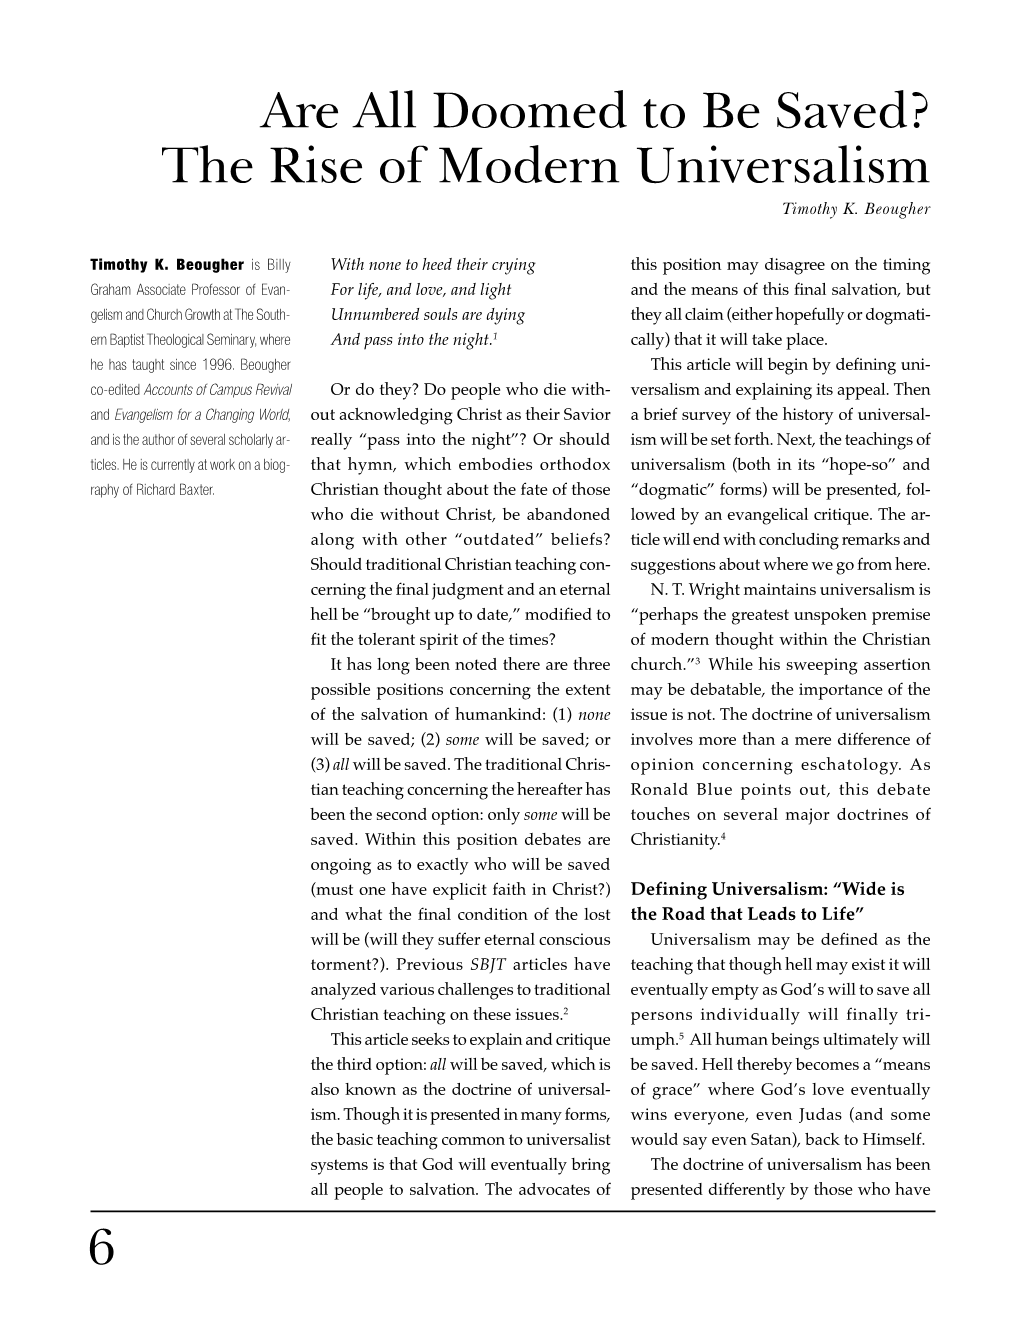 The Rise of Modern Universalism Timothy K